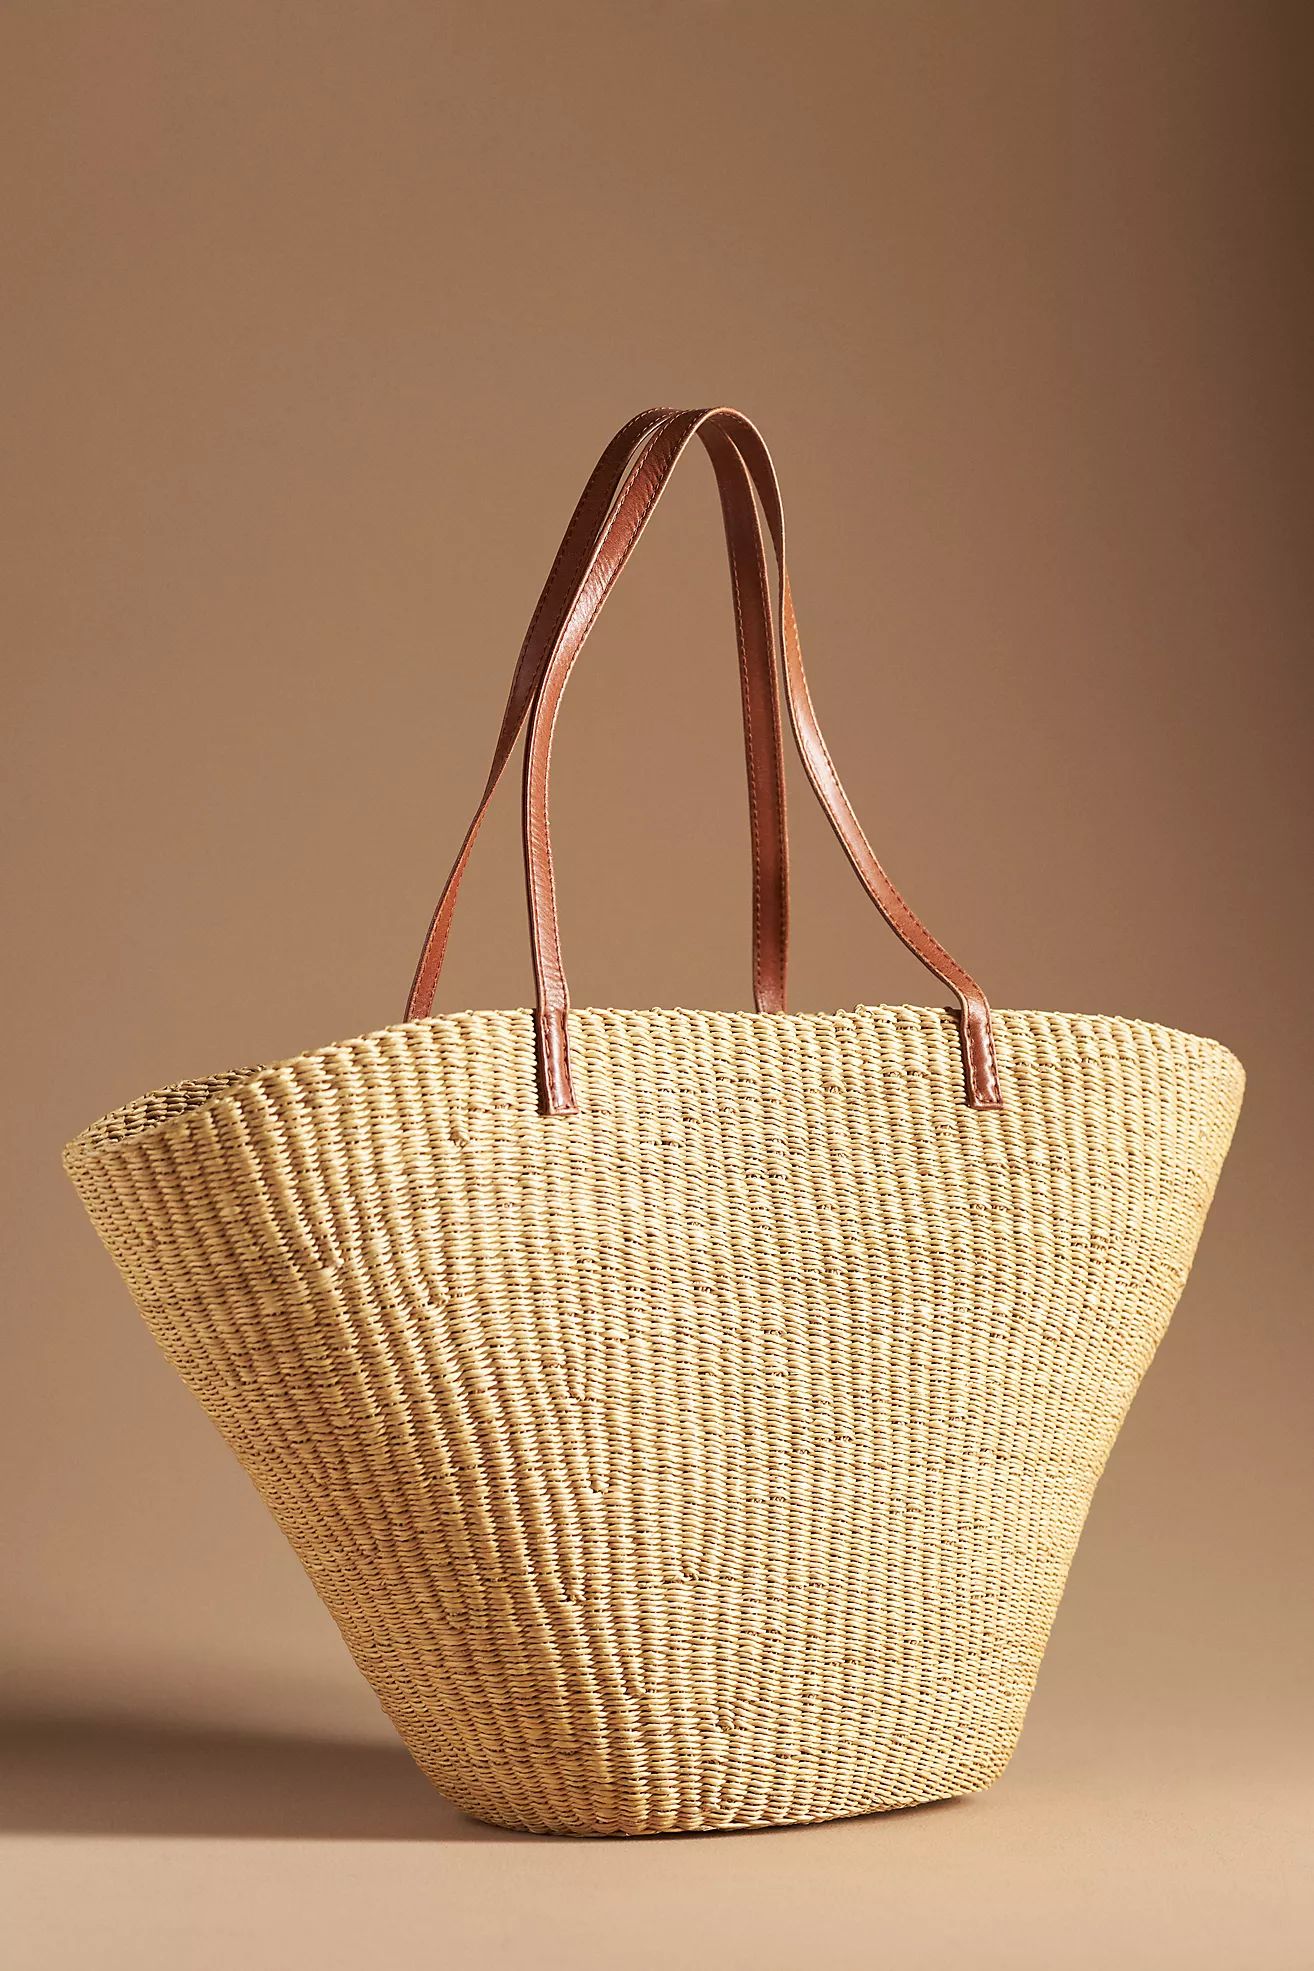 Bembien Solana Tote | Anthropologie (US)